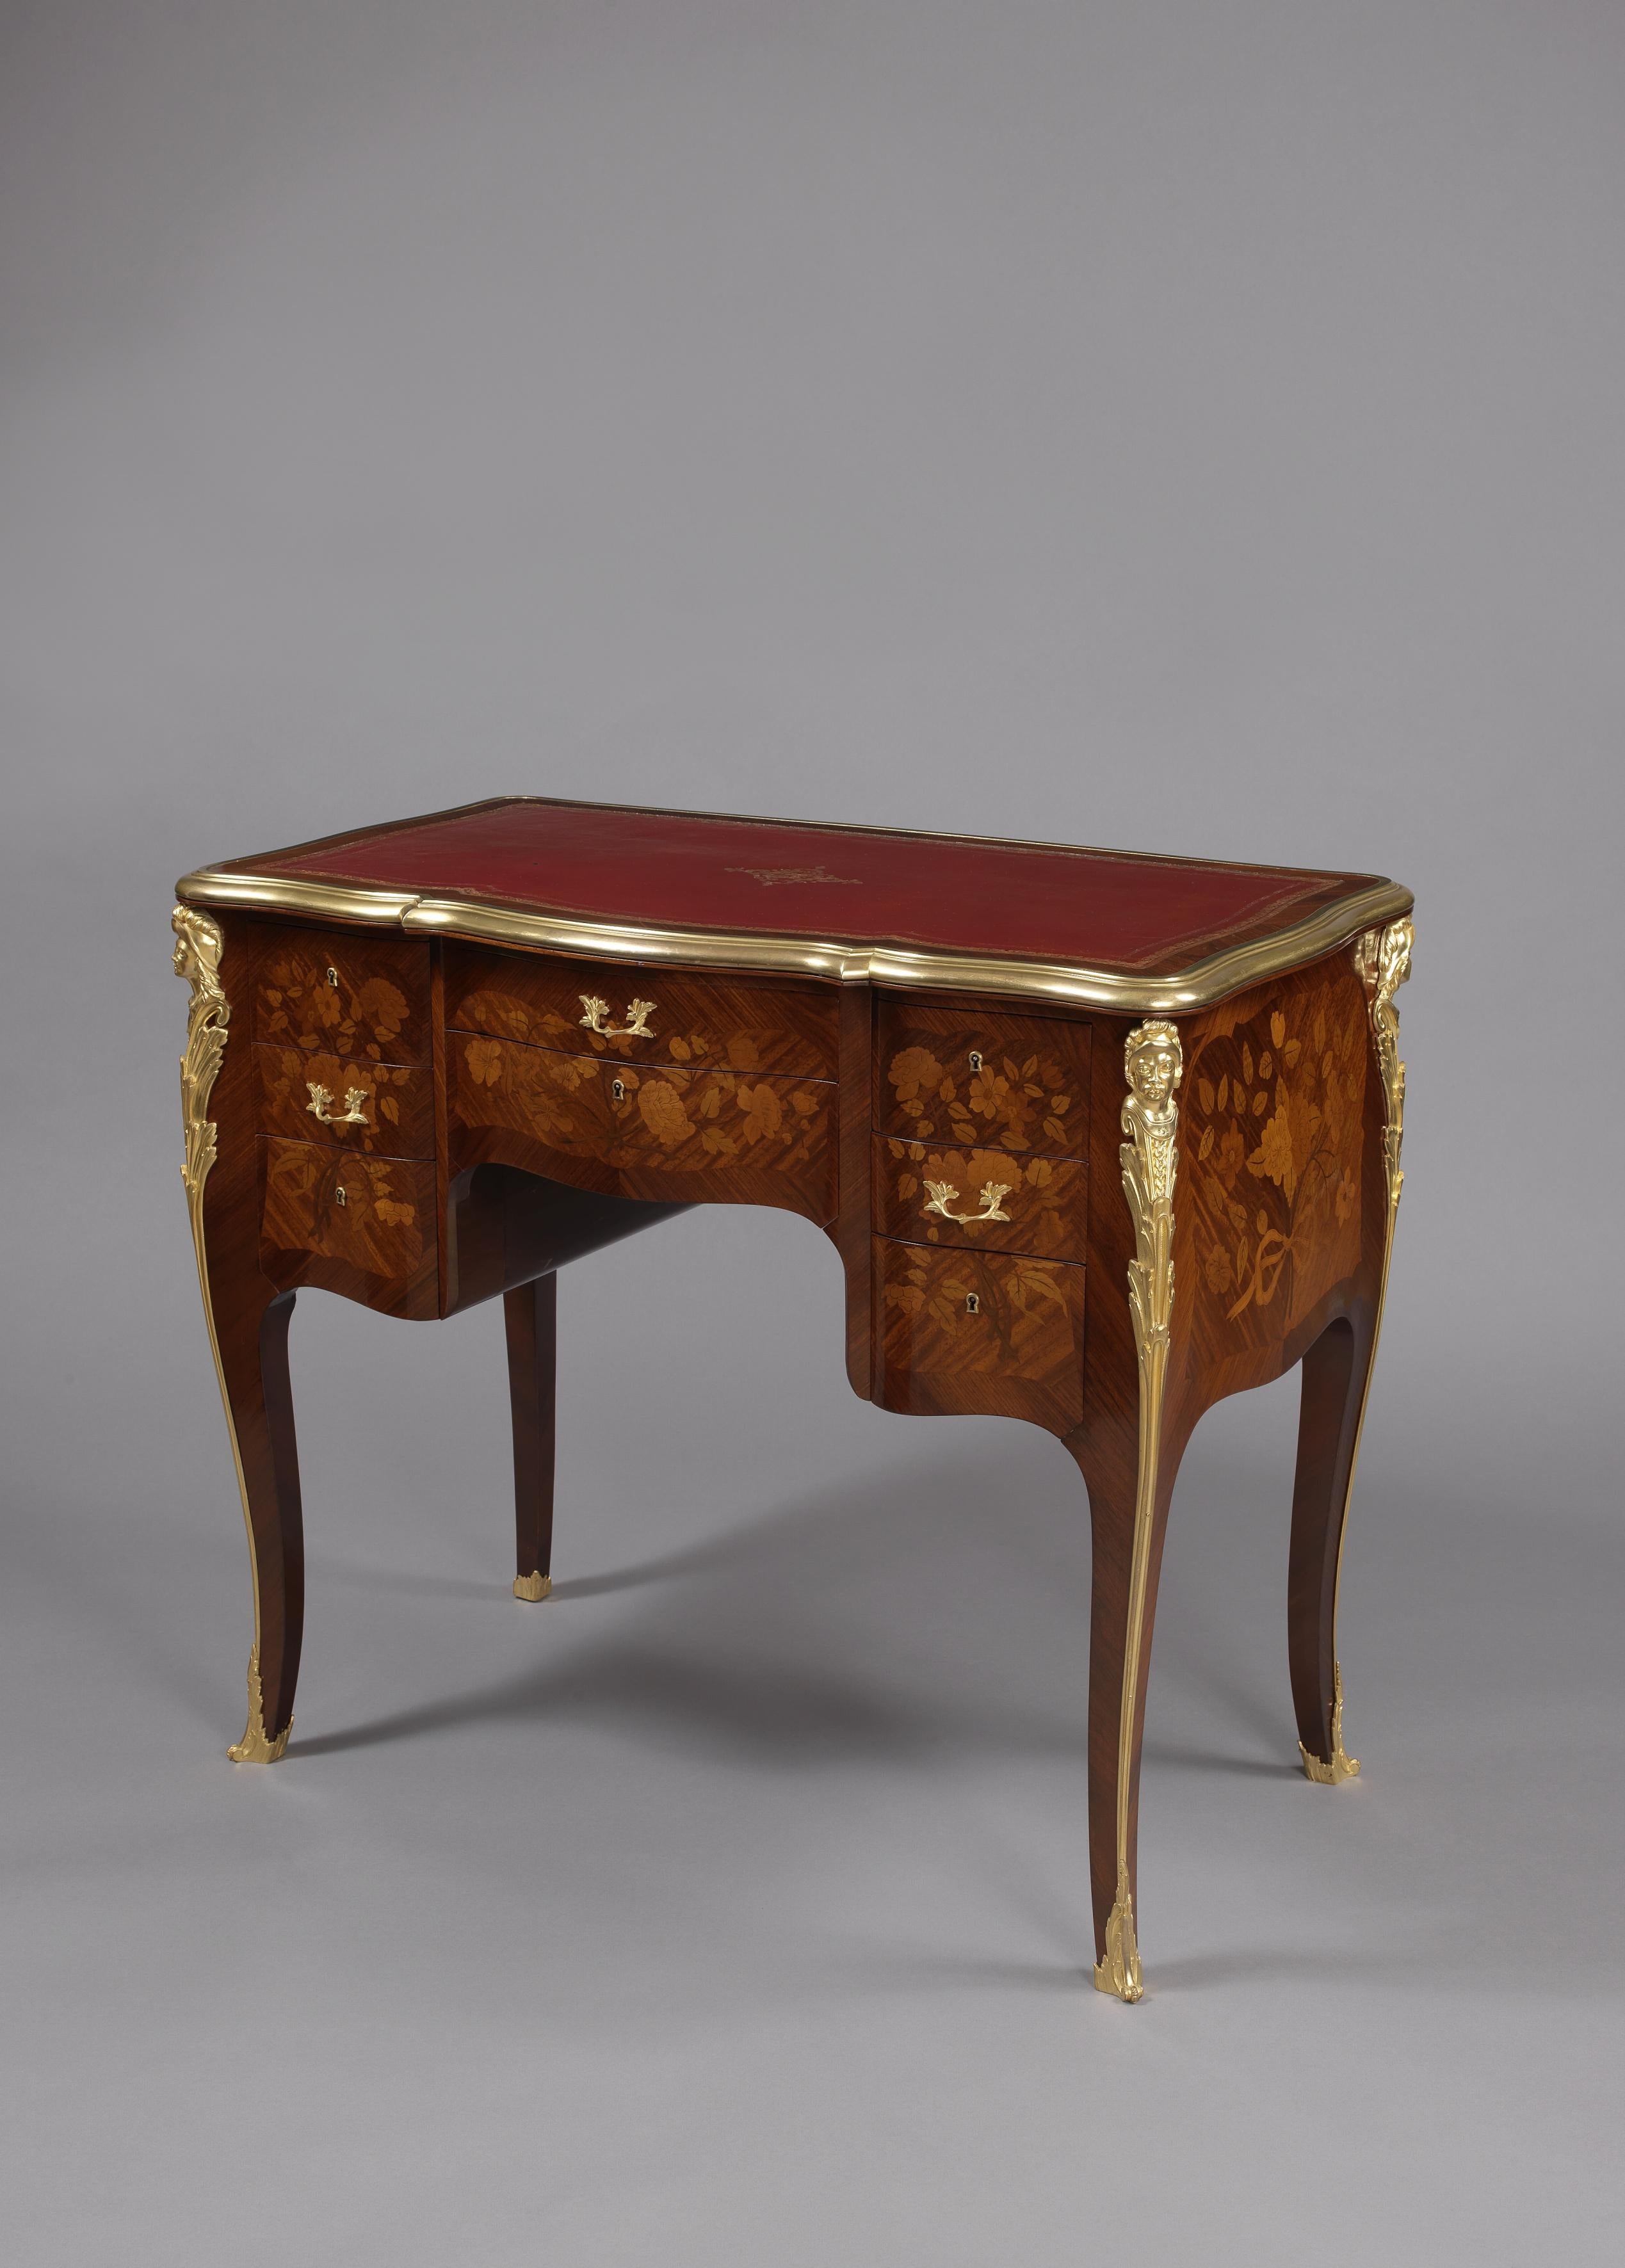 A rare and unusual Louis XV style gilt-bronze mounted and marquetry inlaid Bureau de Dame by François Linke.

French, circa 1890.

Signed to the gilt-bronze rim ‘Linke’. 
Stamped to the reverse of the handles 'FL'. 
The lockplate stamped 'CT